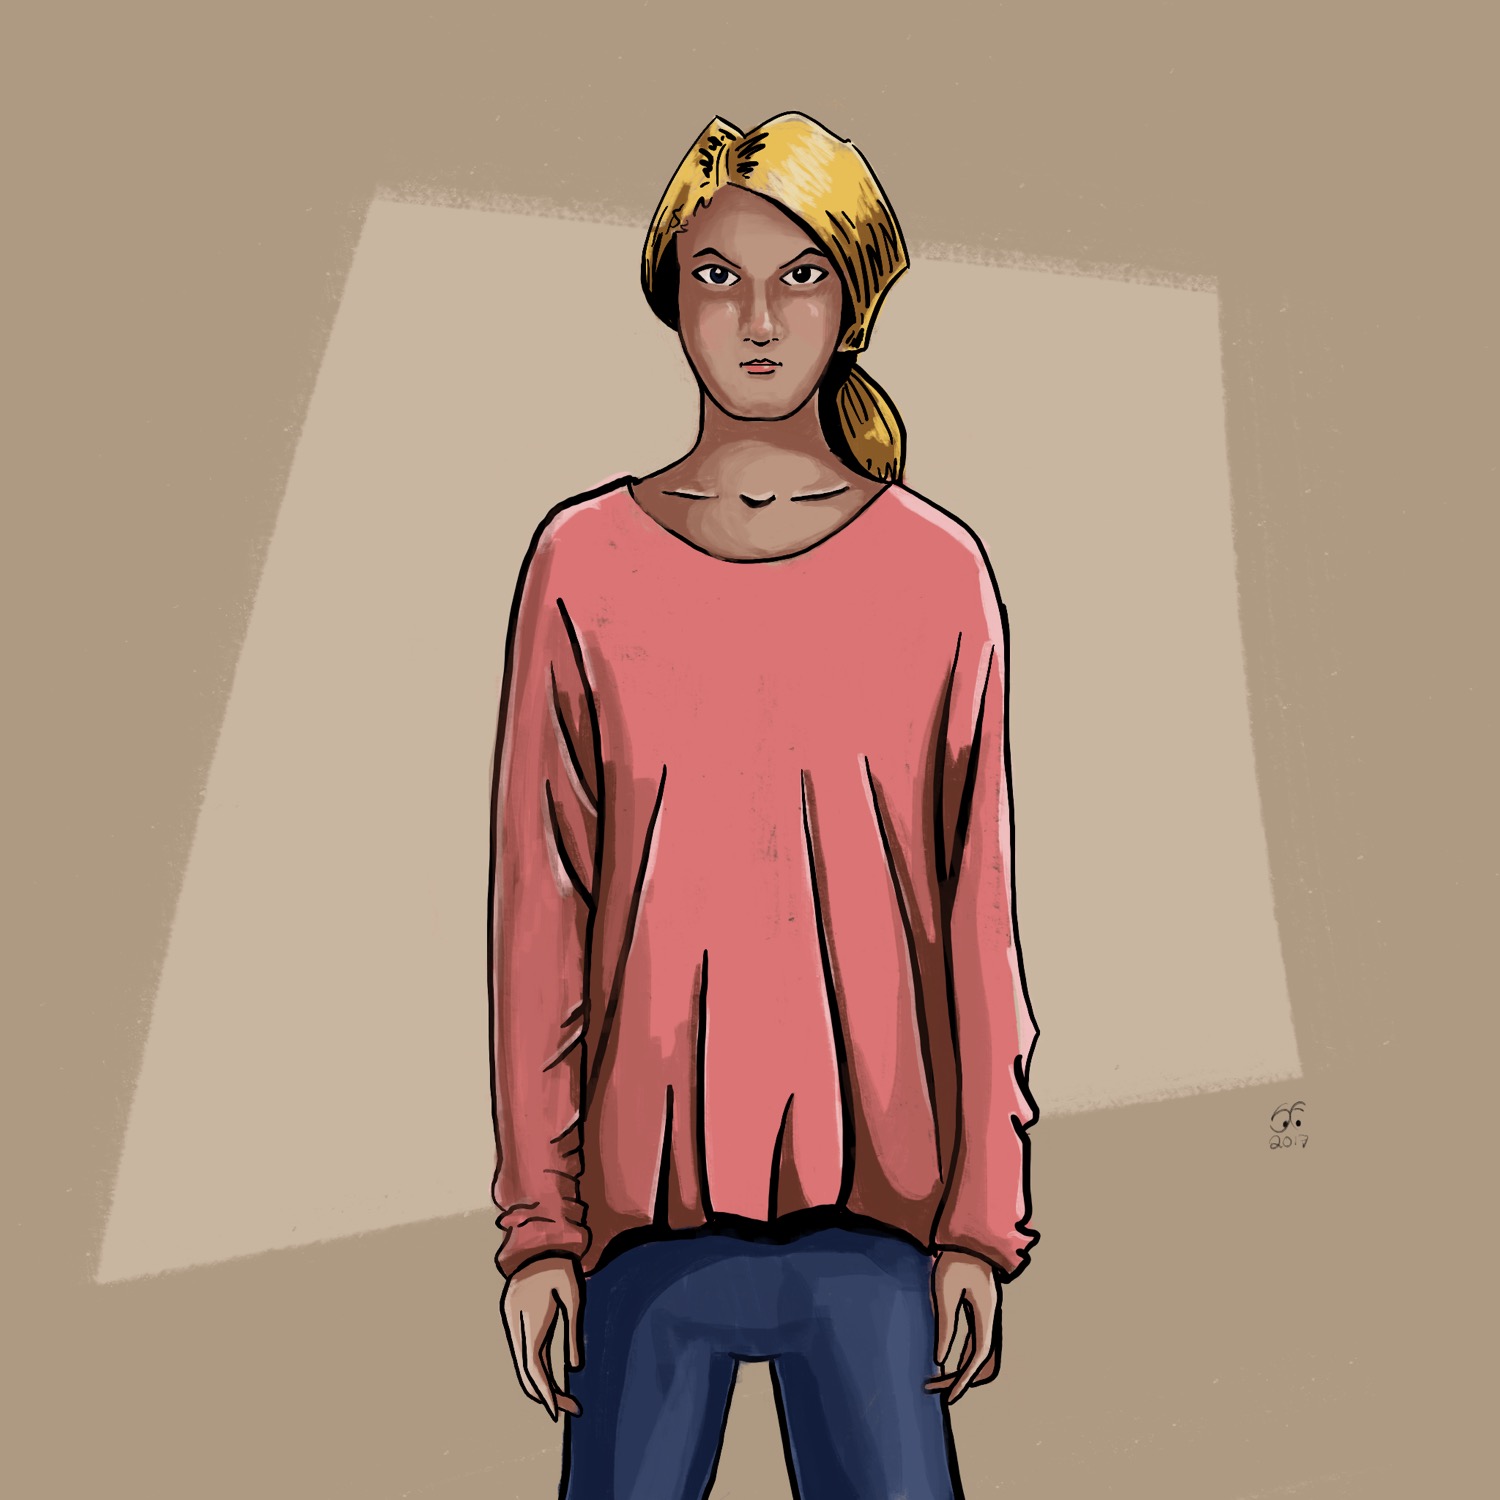 Sketch of a girl in a salmon top